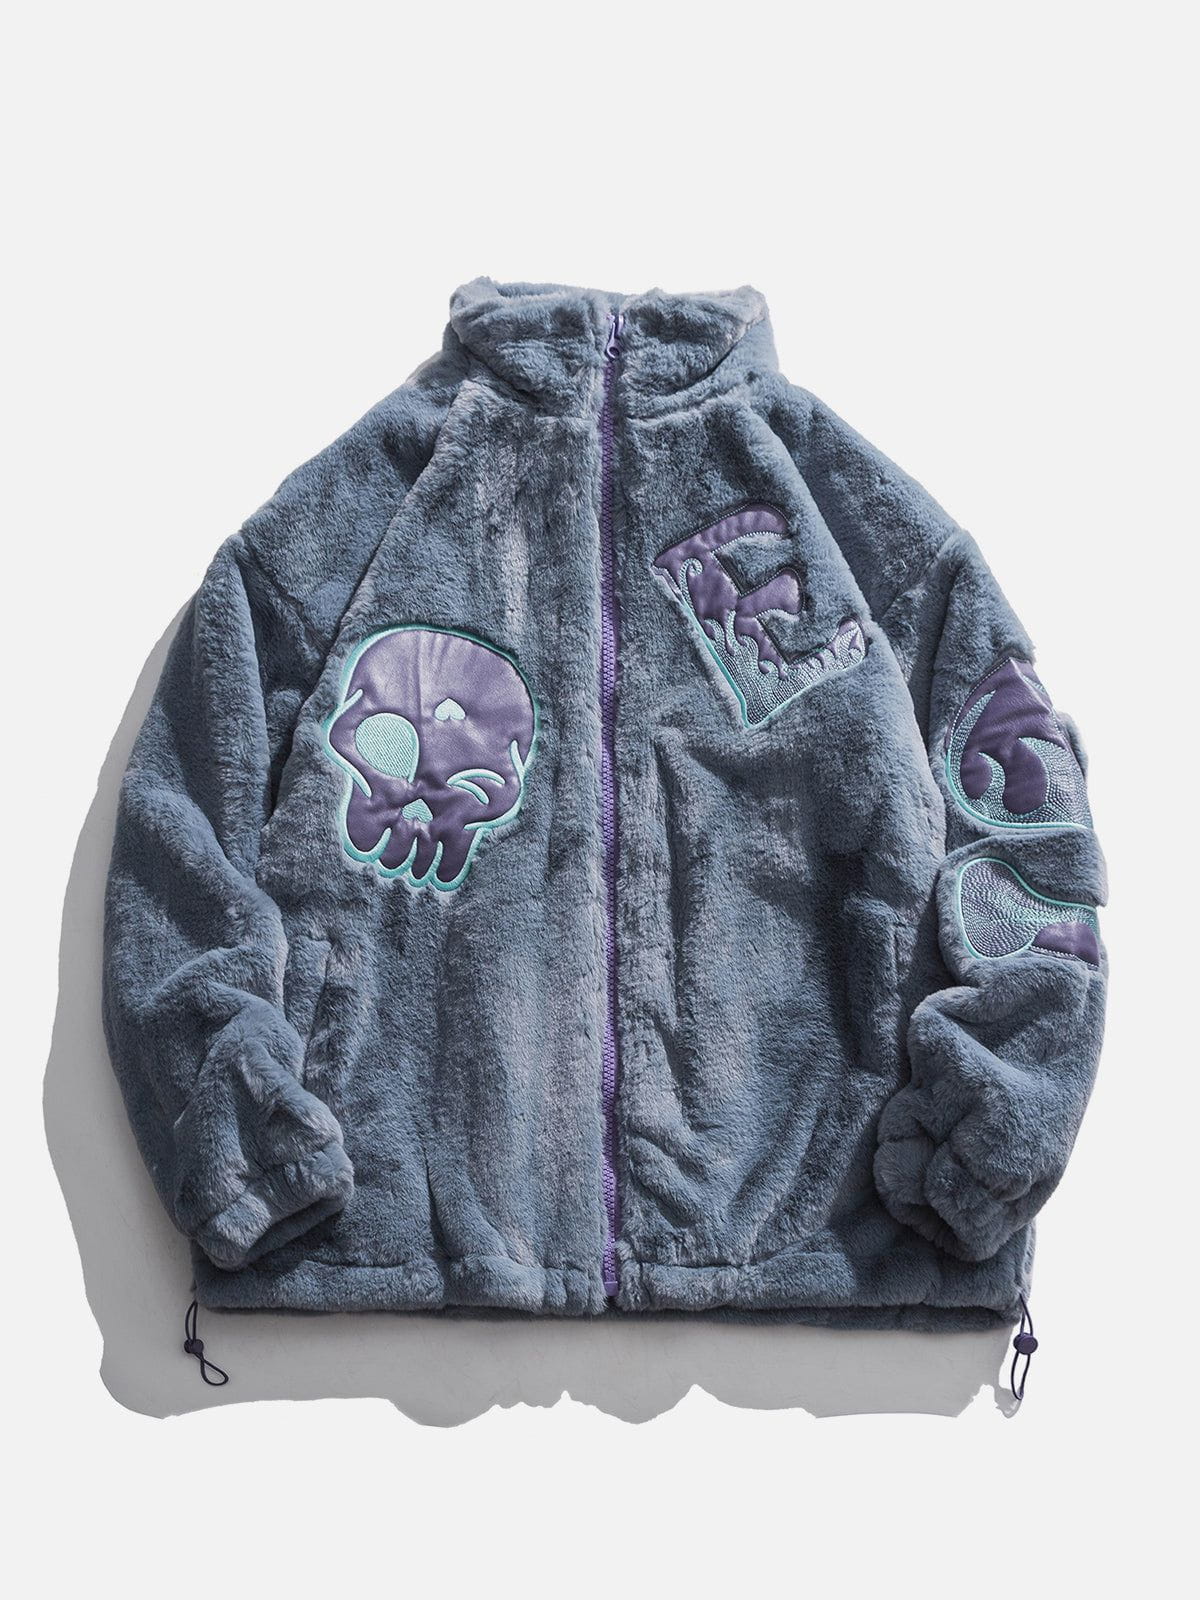 LUXENFY™ - Skull Embroidery Sherpa Winter Coat luxenfy.com